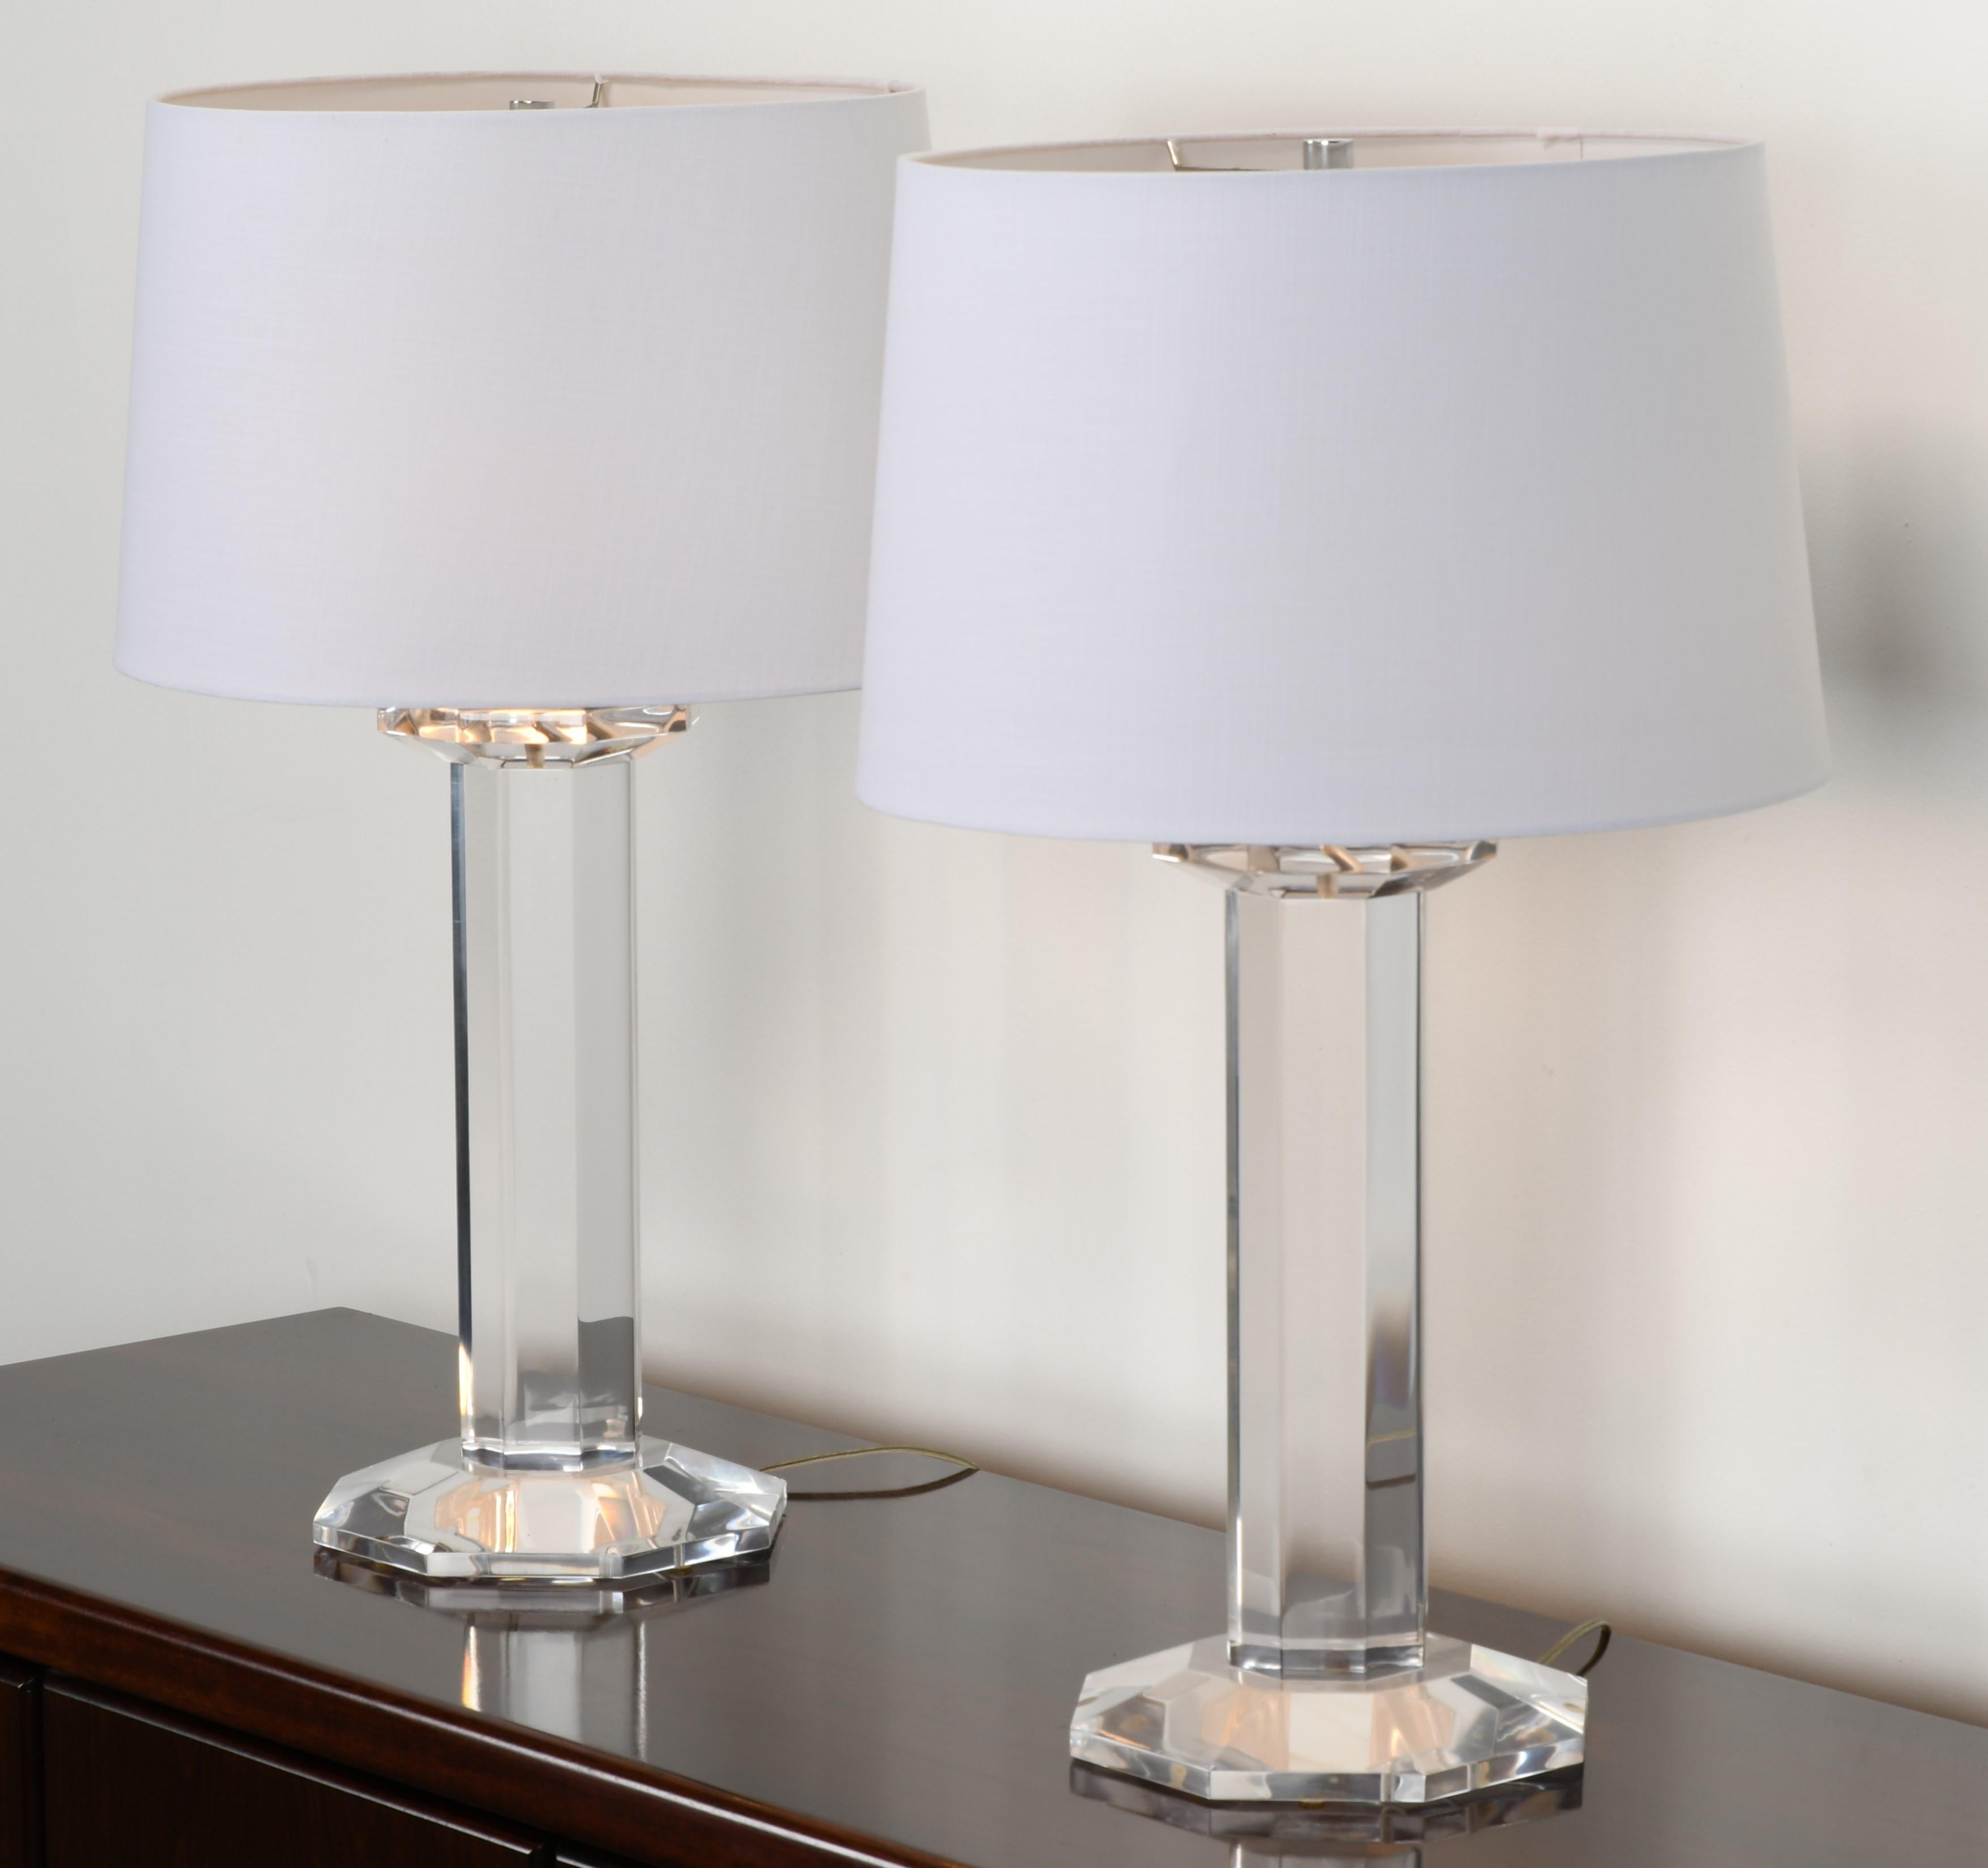 A pair of large column table lamps made of solid Lucite by Karl Springer, American, 1980s. Signed on top of the column, as shown in images. Very good condition. Shades not included. 

Dimensions: 28.5